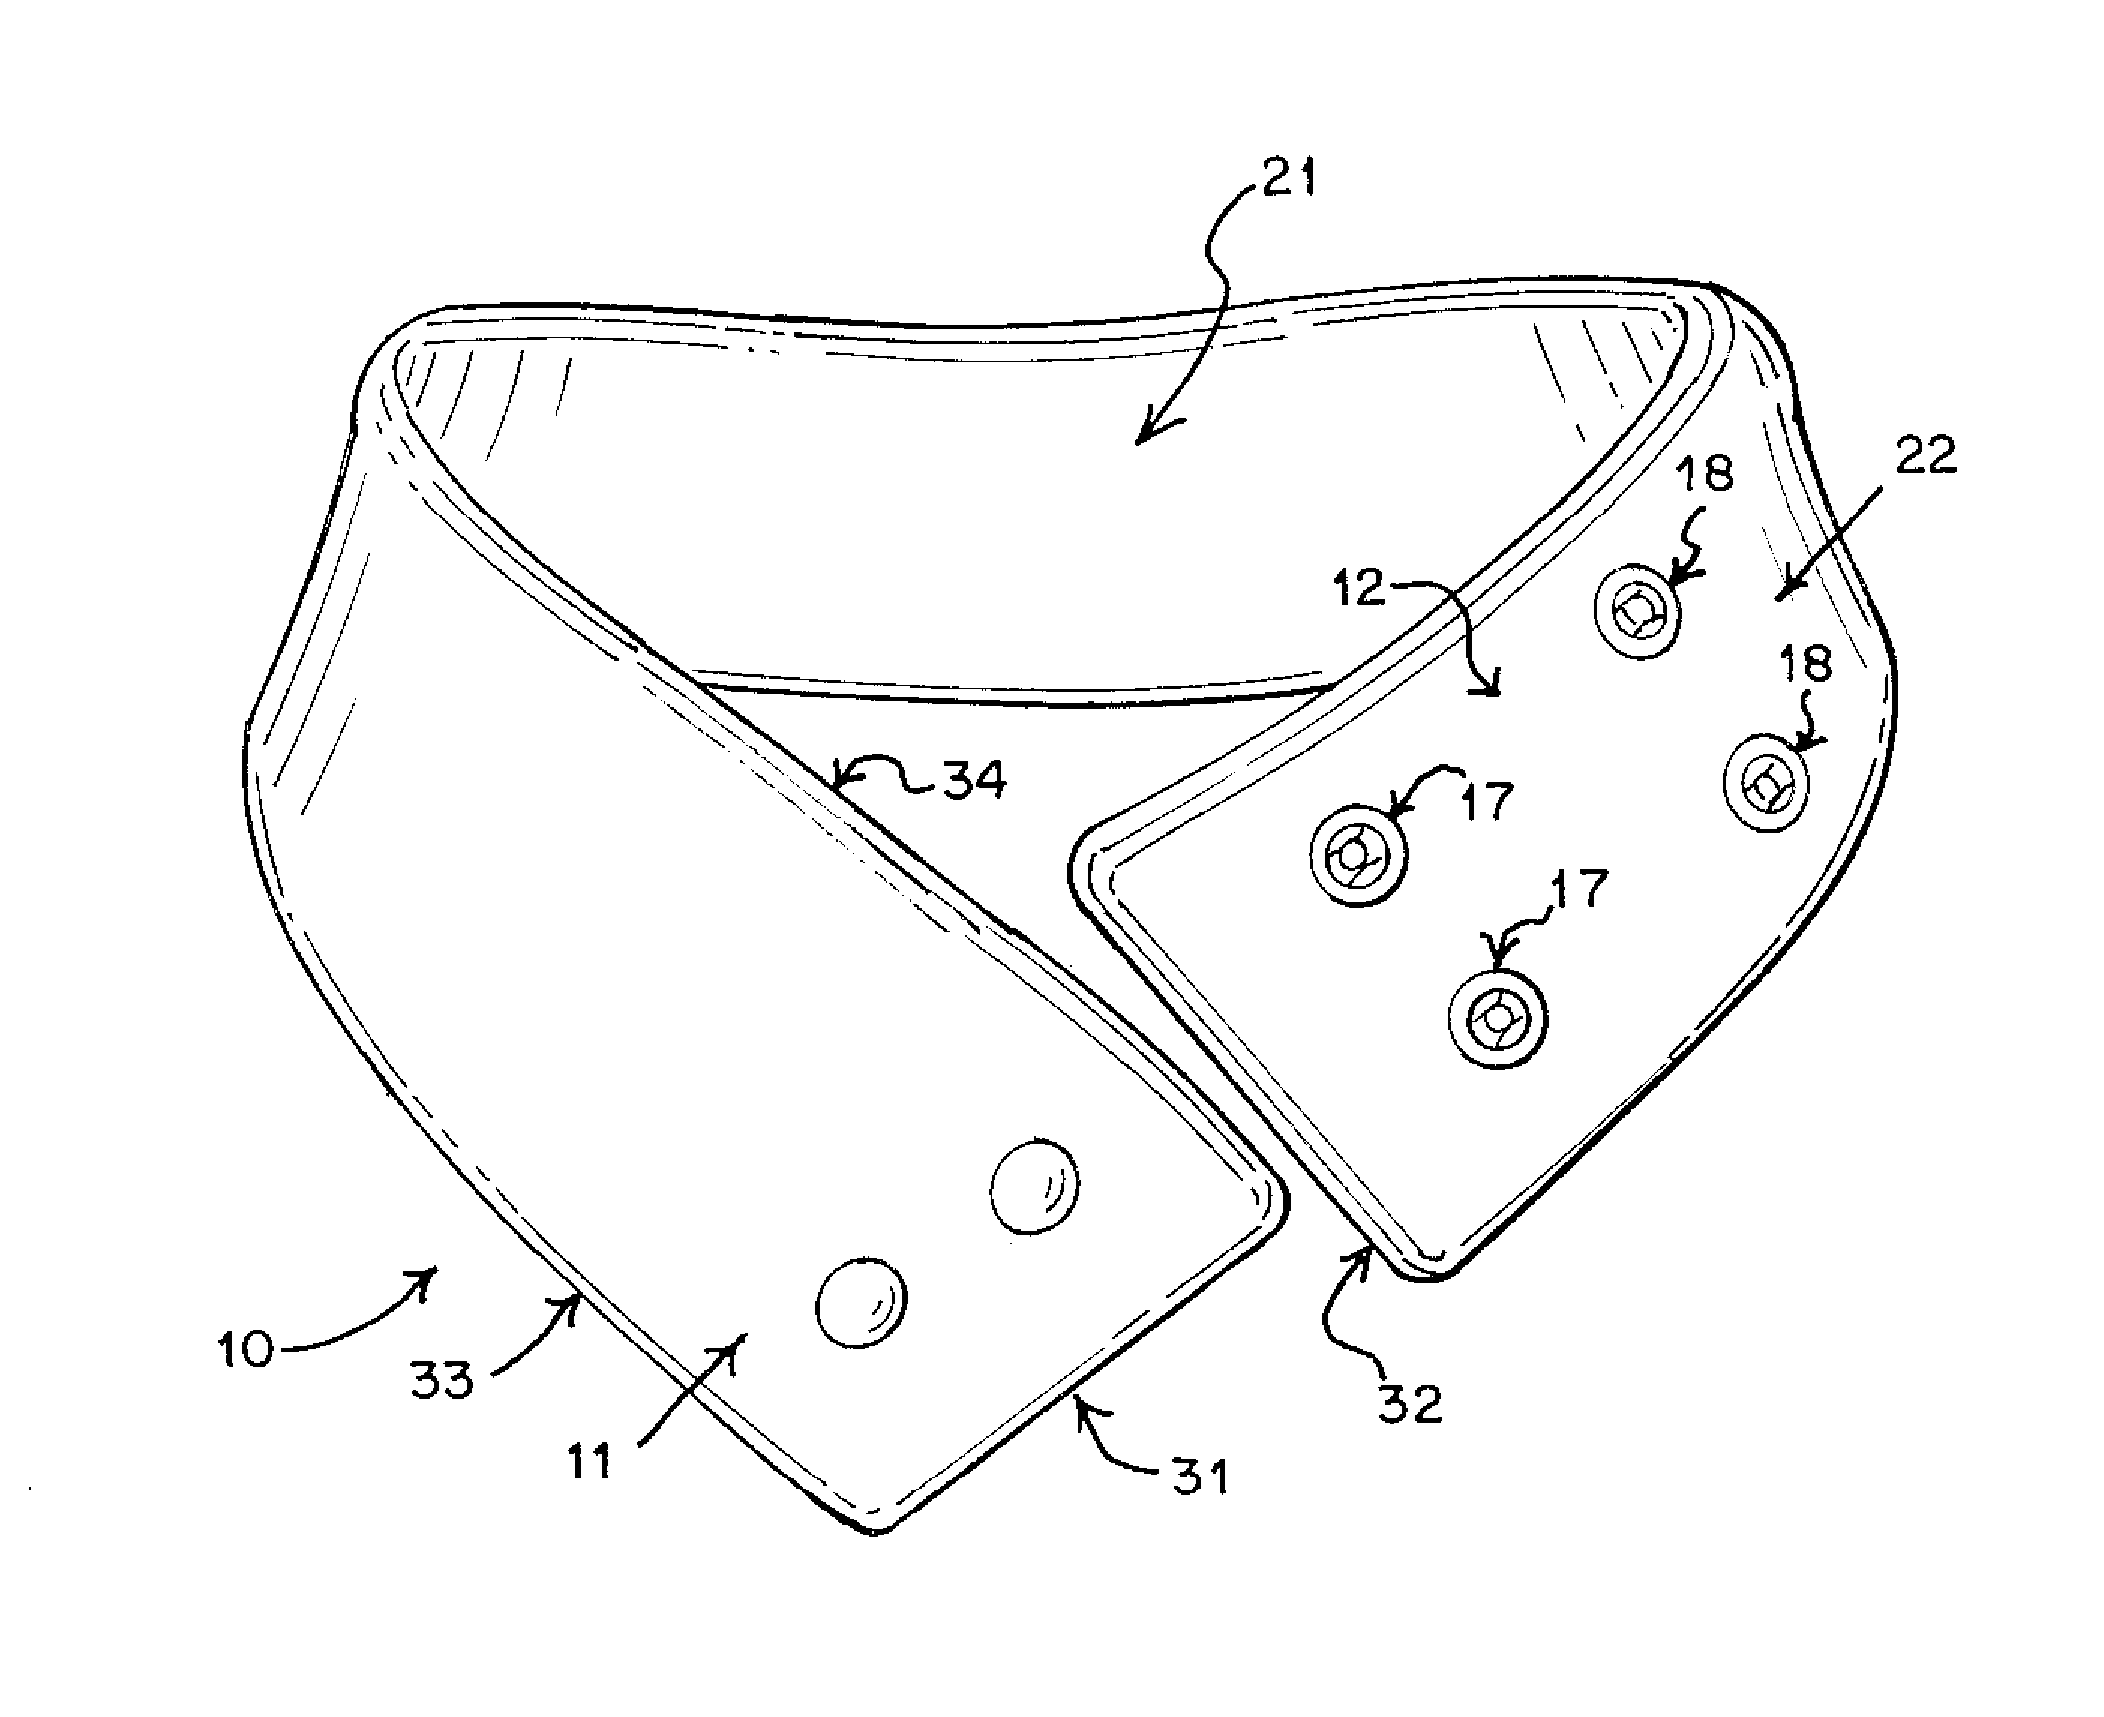 Cough suppressant garment and system and method for suppressing coughing